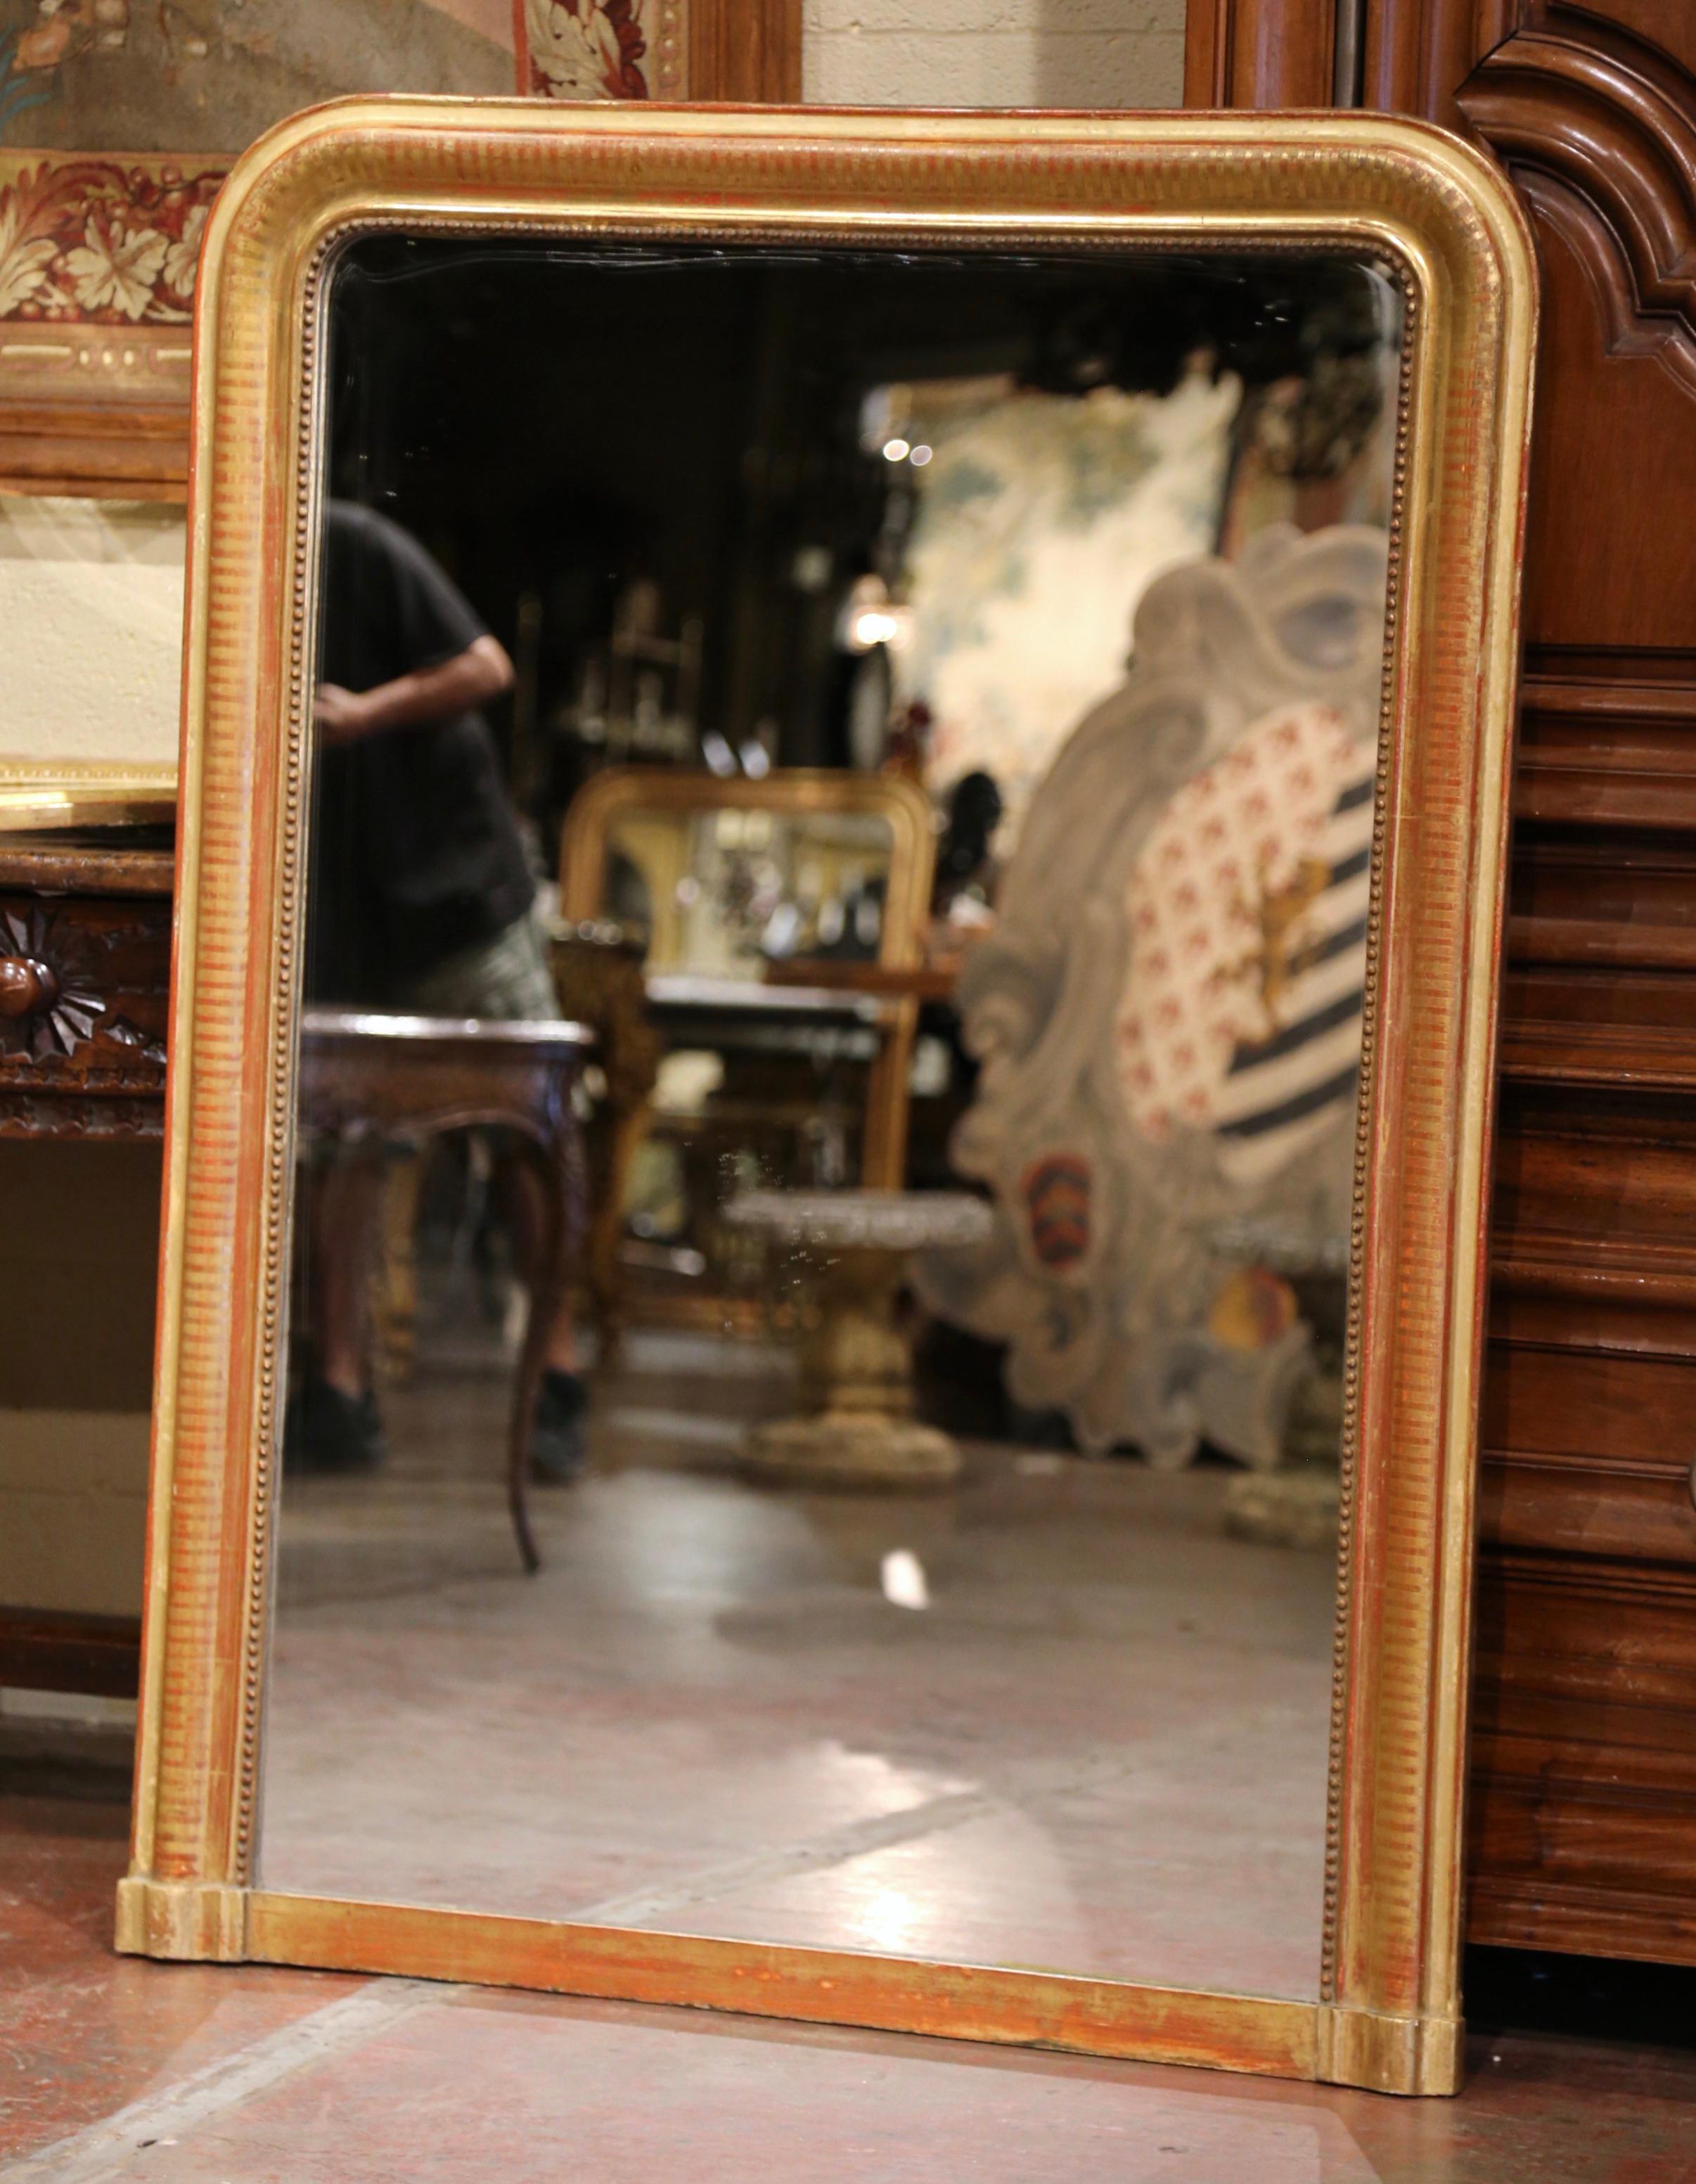 Dress a mantel with this elegant antique Louis Philippe style mirror. Crafted in the Burgundy region of France, circa 1860, the large wall mirror has traditional, timeless lines with rounded corners and a straight base bottom. The elegant frame is